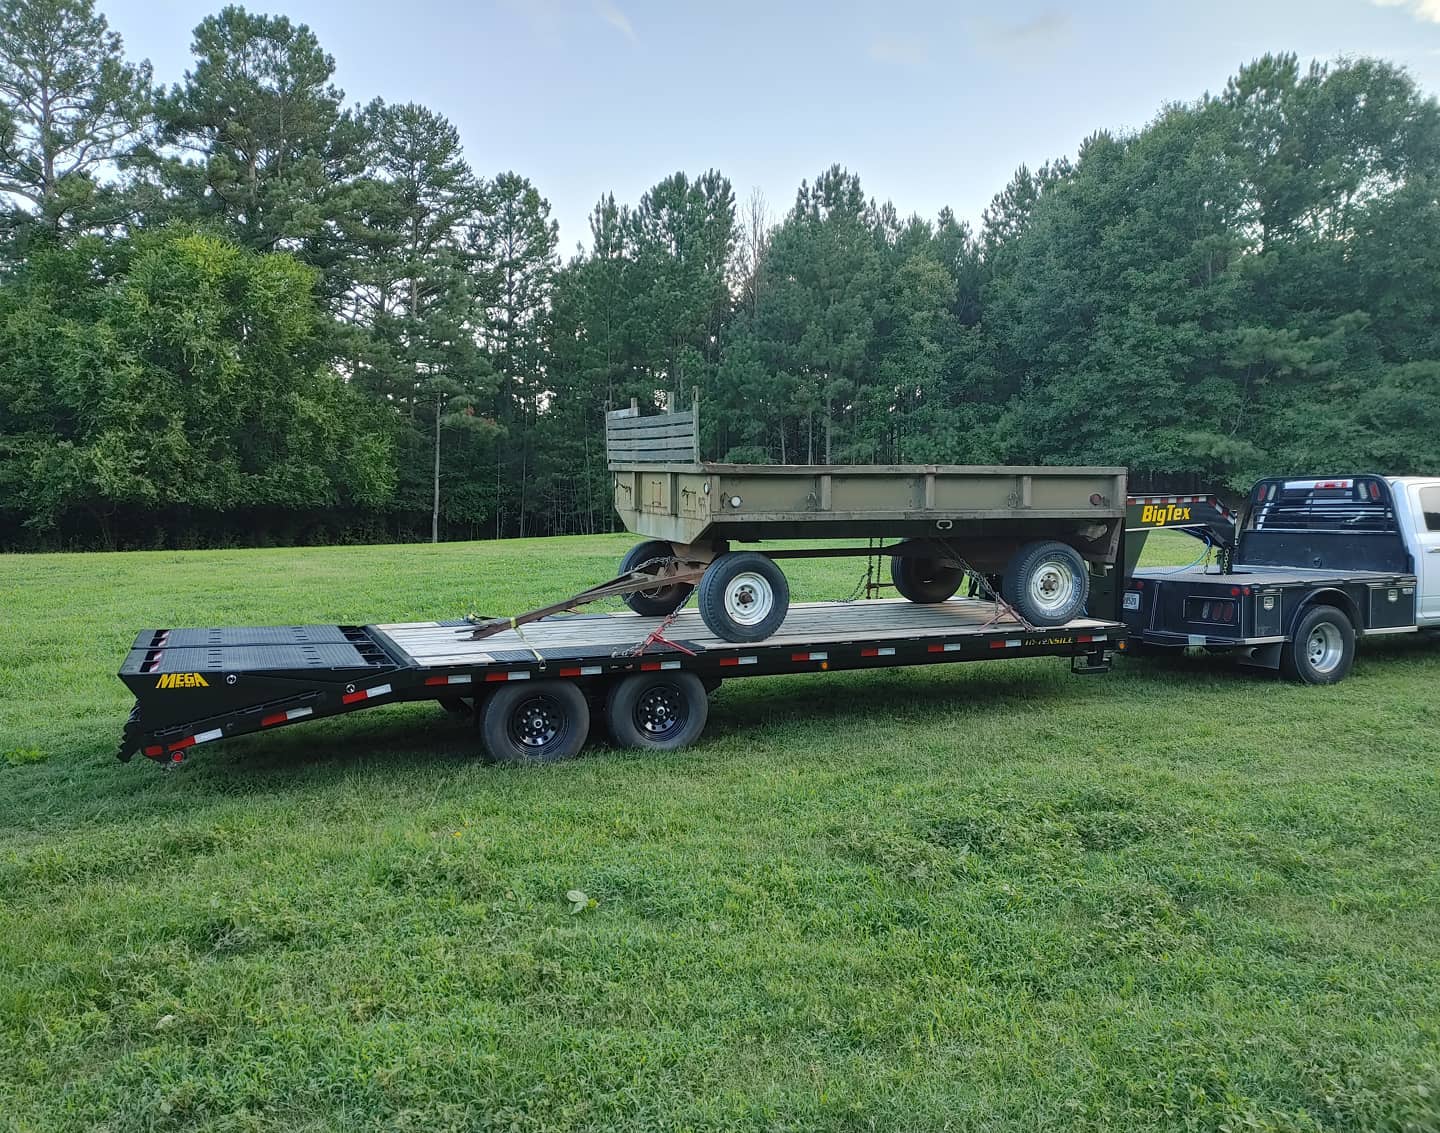 I wanted a hay rack but that's not really a thing in the south so I've ended up with this old us army wagon. We'll see if it can become friends with my unimog for a parade at some point.